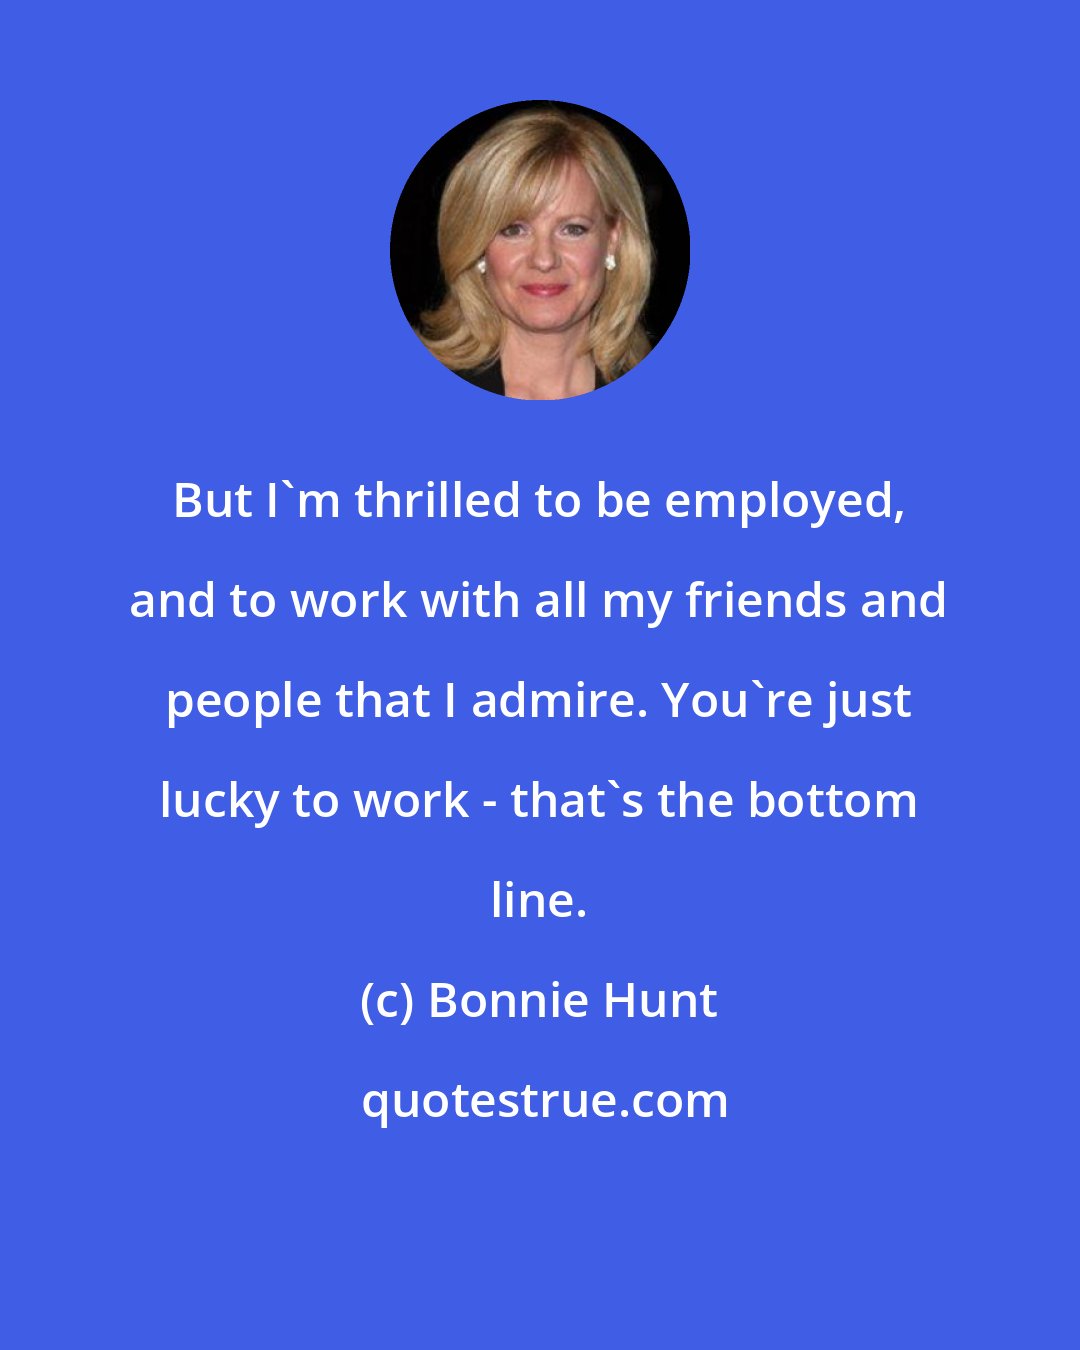 Bonnie Hunt: But I'm thrilled to be employed, and to work with all my friends and people that I admire. You're just lucky to work - that's the bottom line.